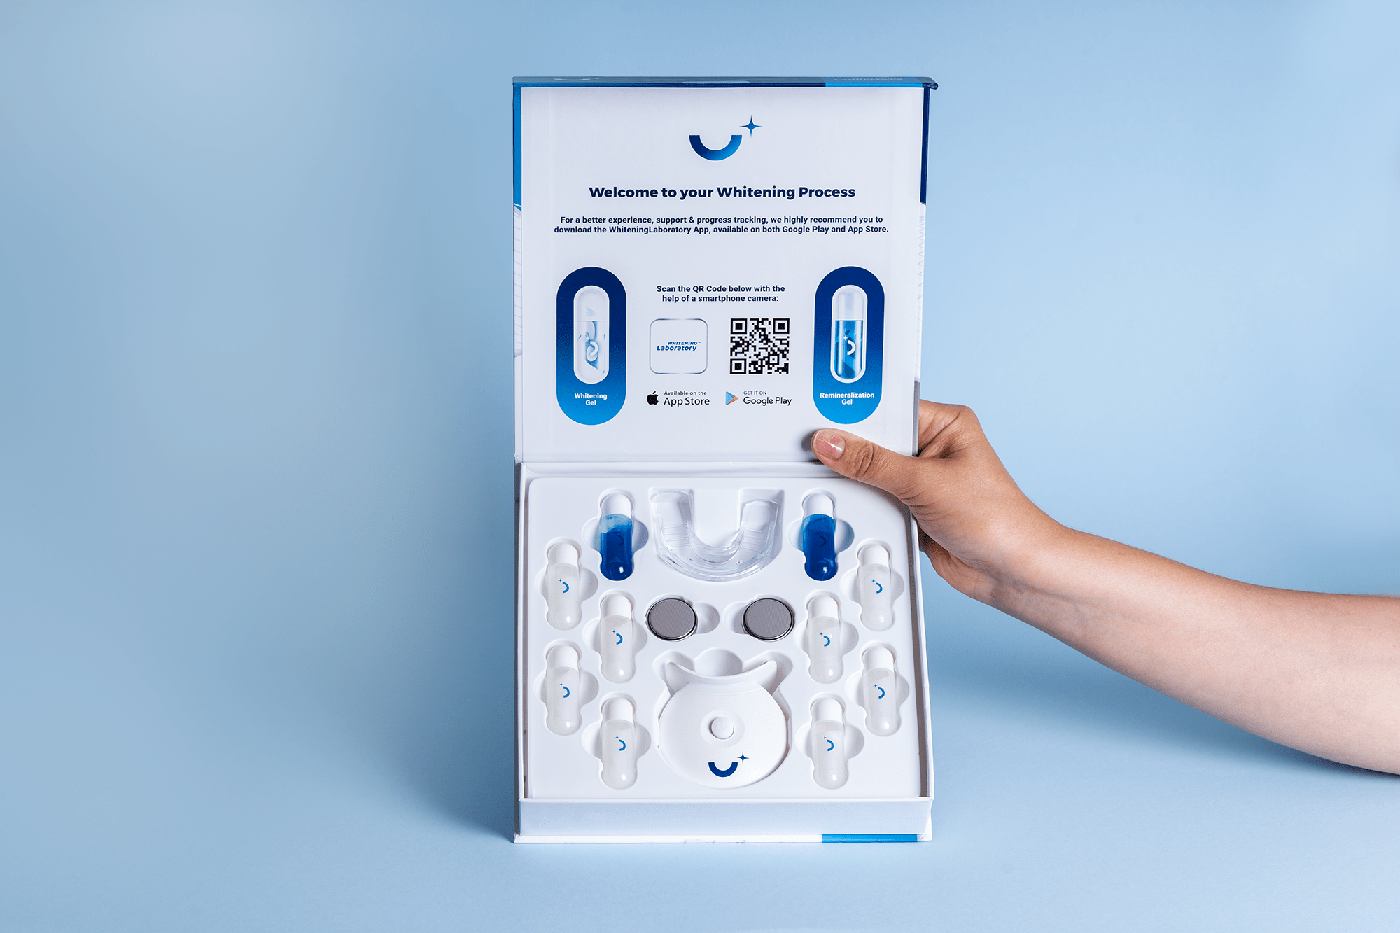 Load video: teeth whitening kit - how to apply whiteninglaboratory whitening laboratory best teeth whitening kit uk no sensitivity no peroxide whitening gel led light technology positive reviews fast results